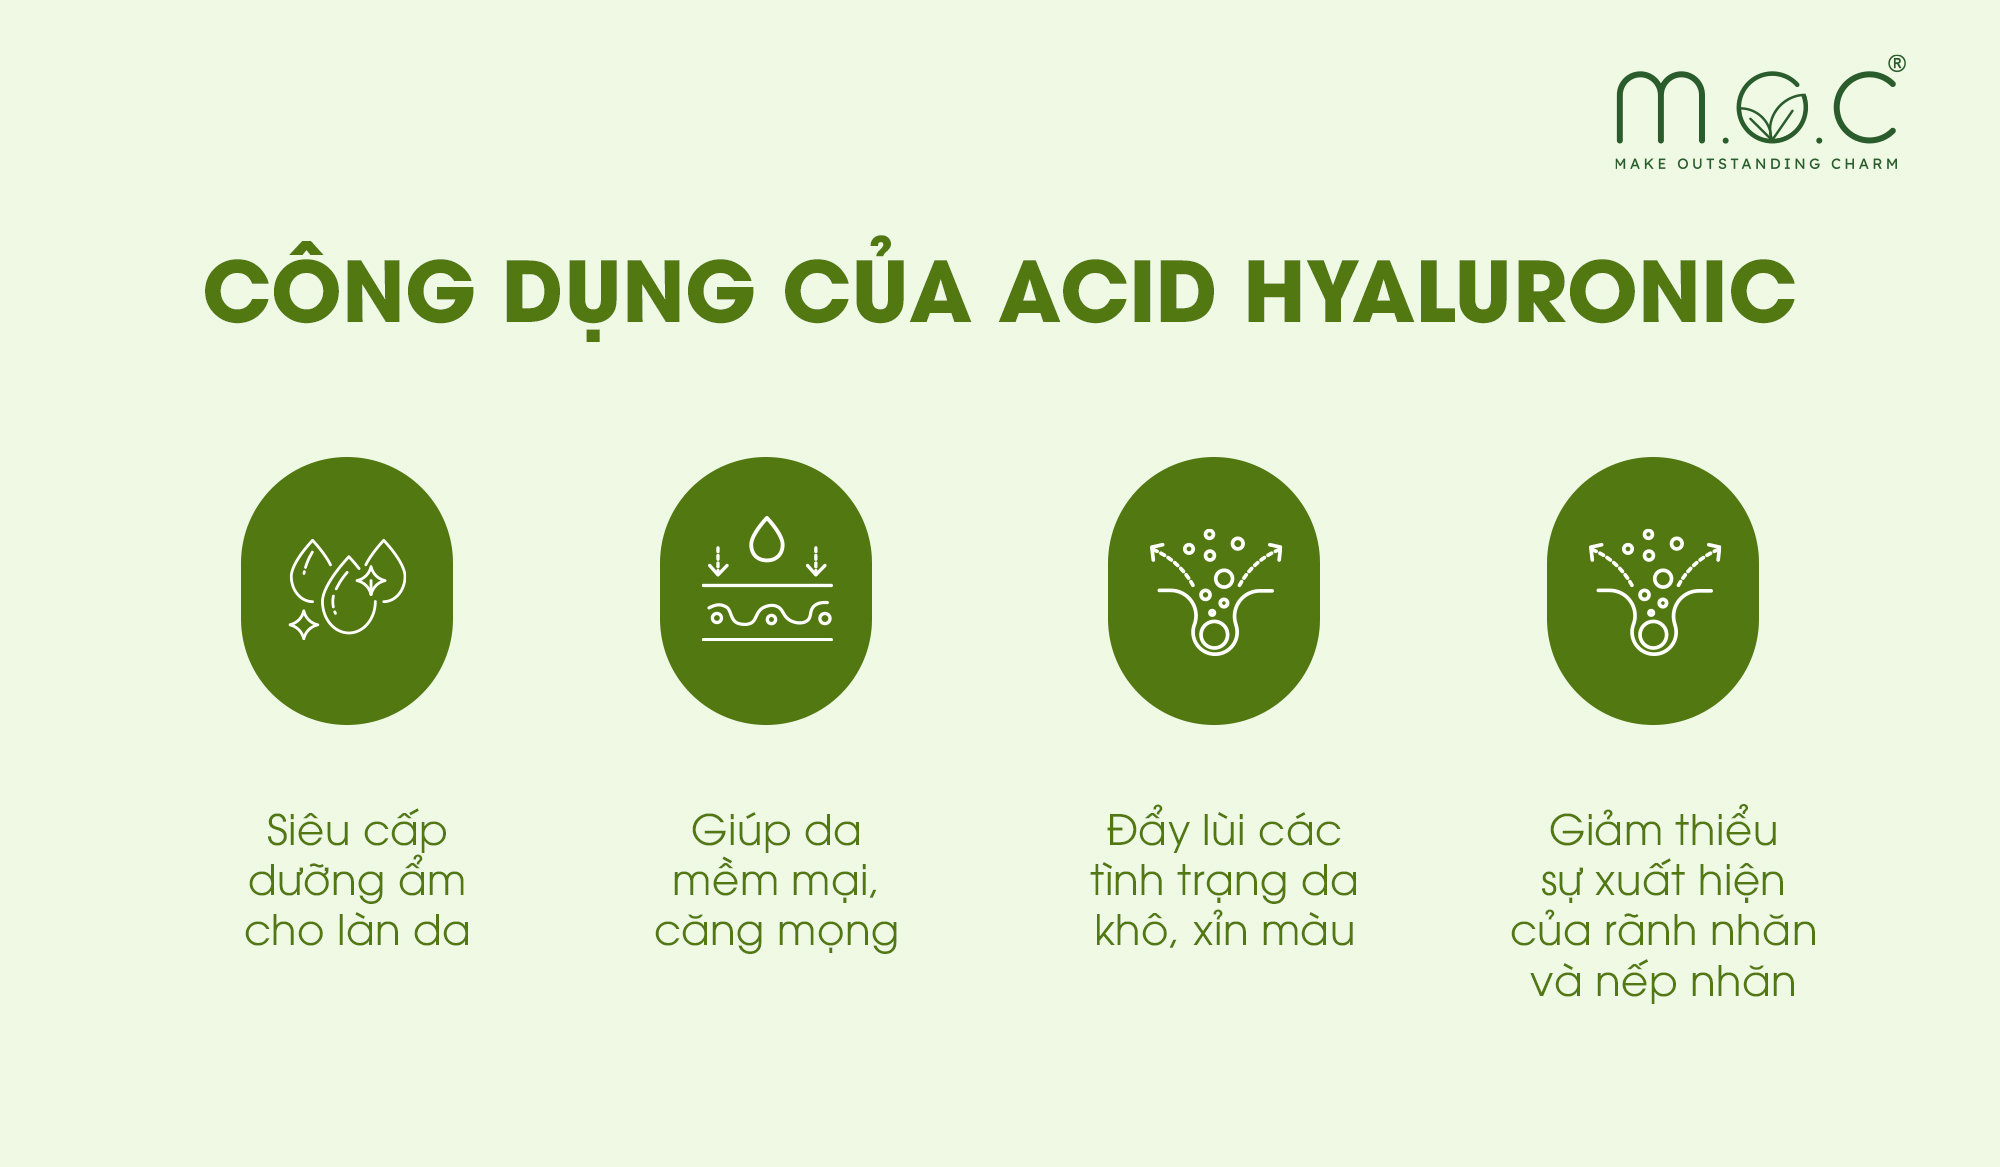 cong-dung-cua-axit-hyaluronic